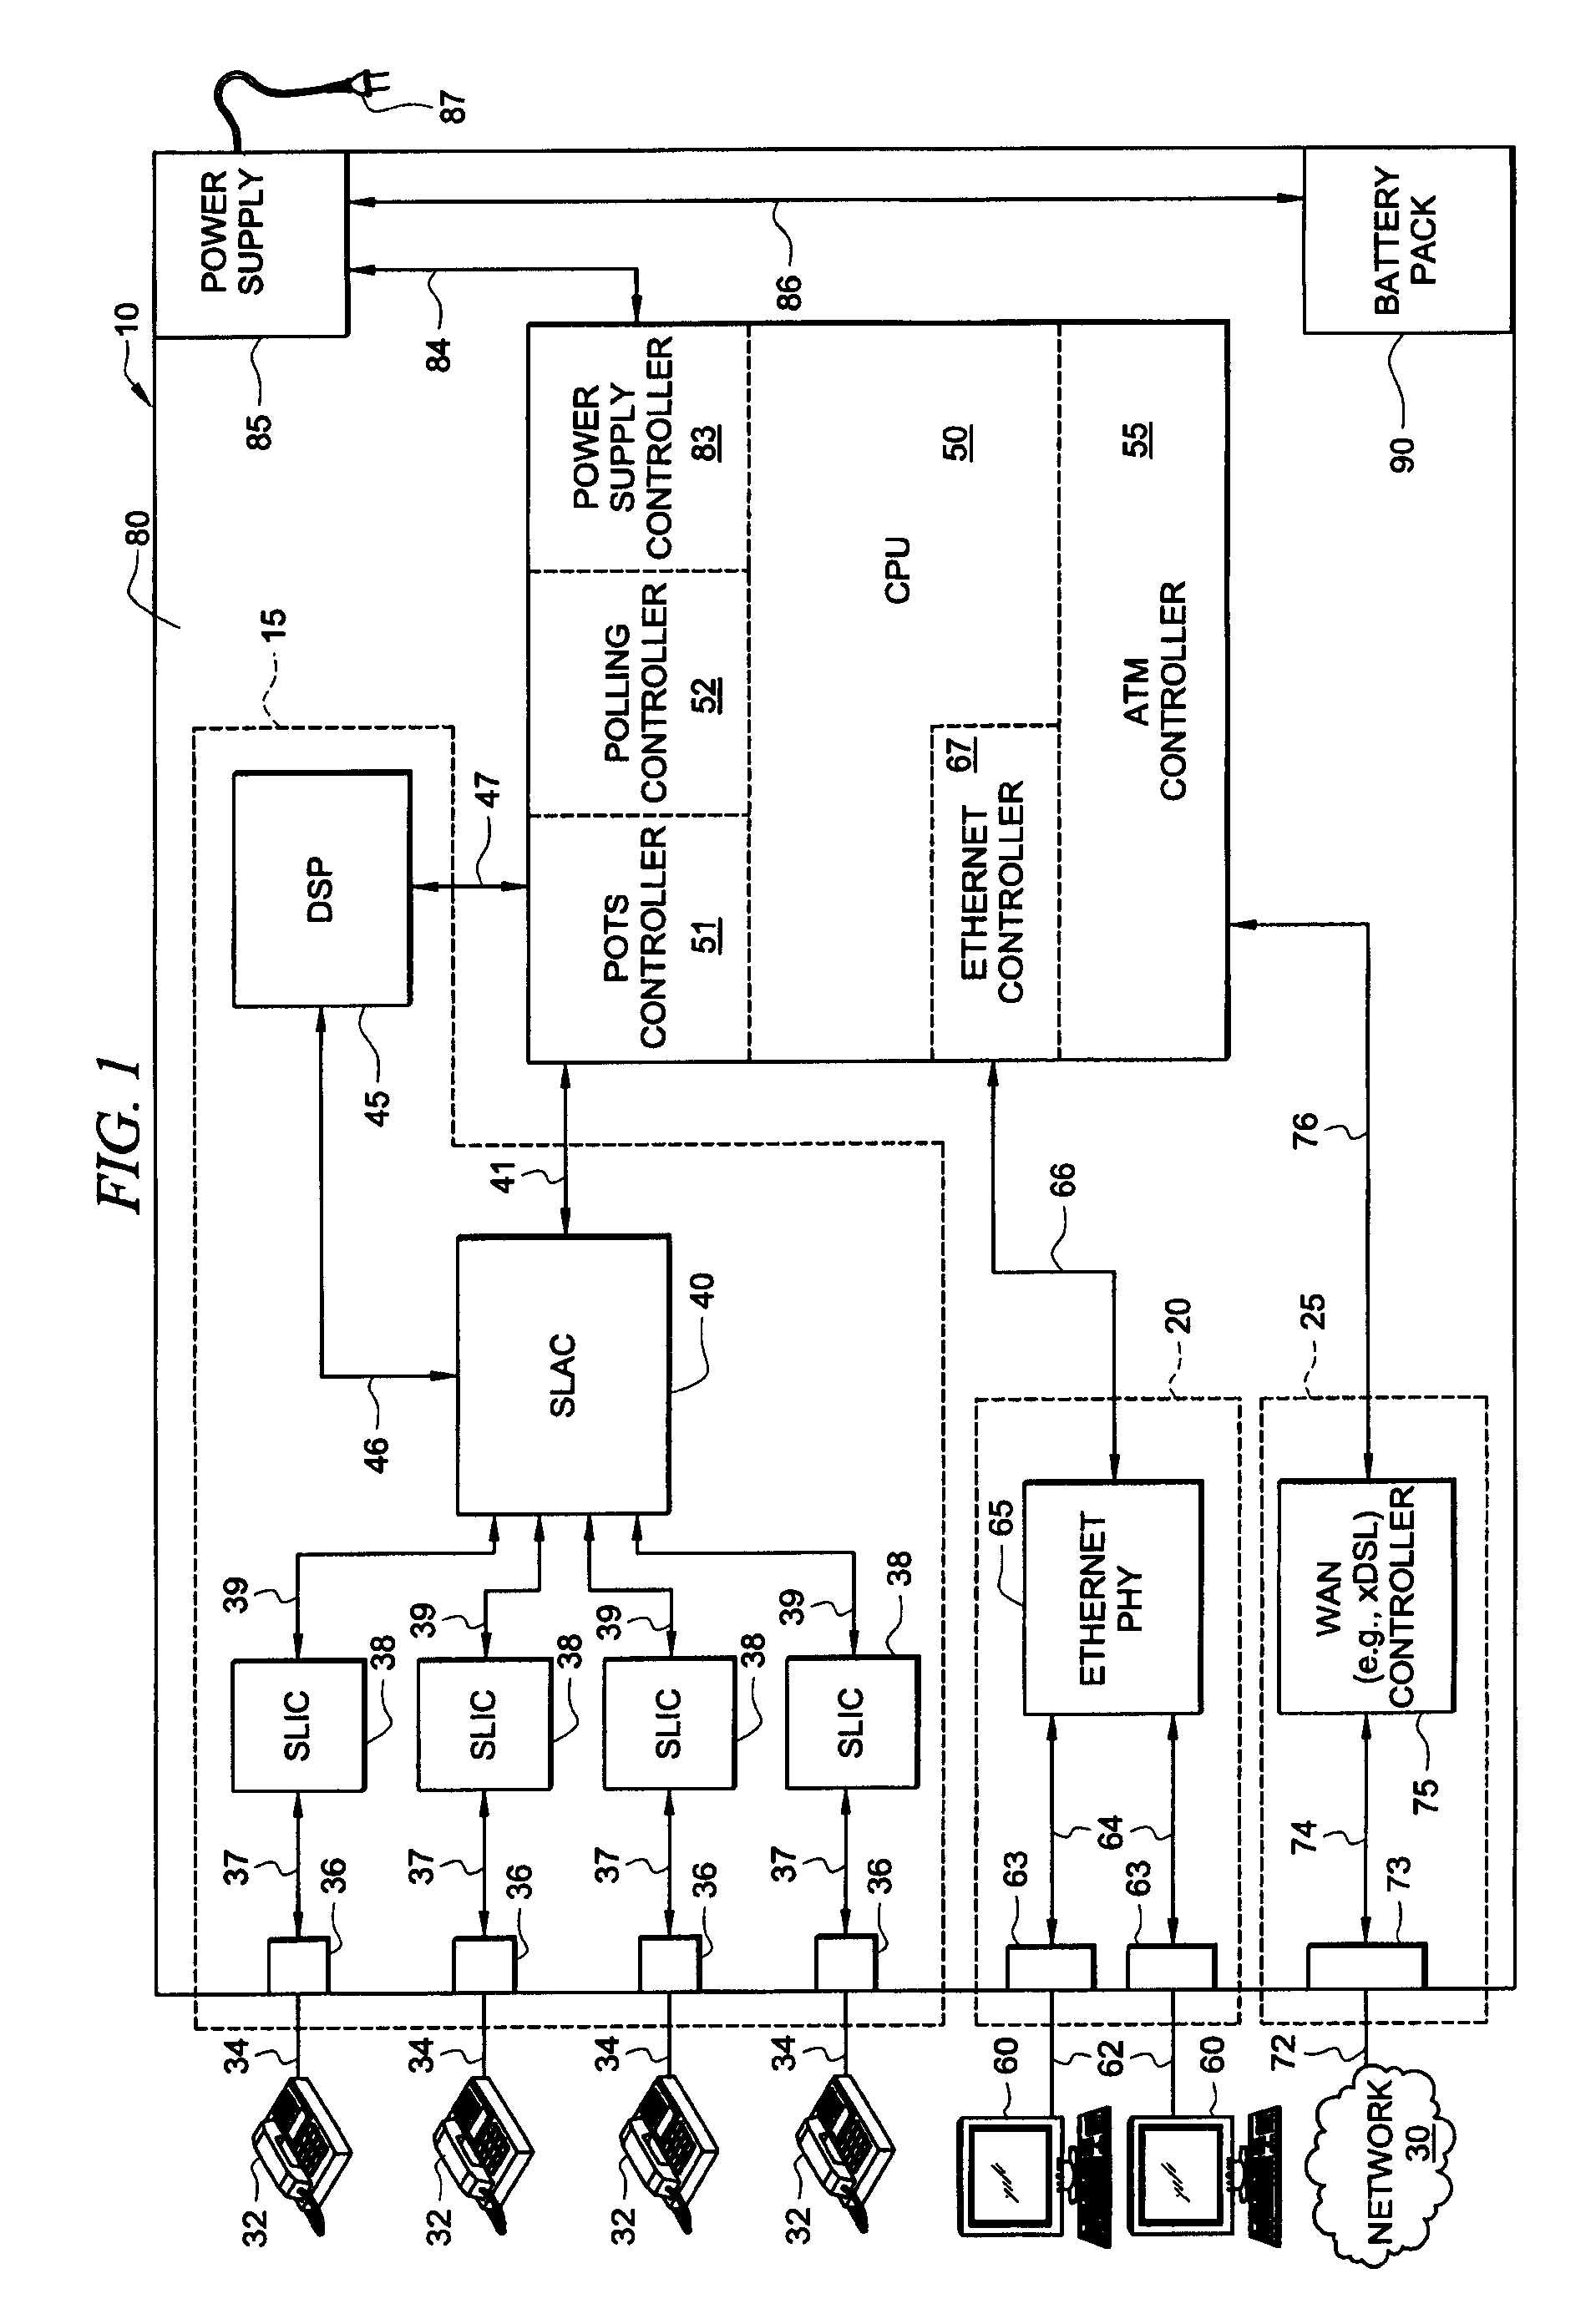 Method and apparatus for determining and reporting the operational status of an integrated services hub